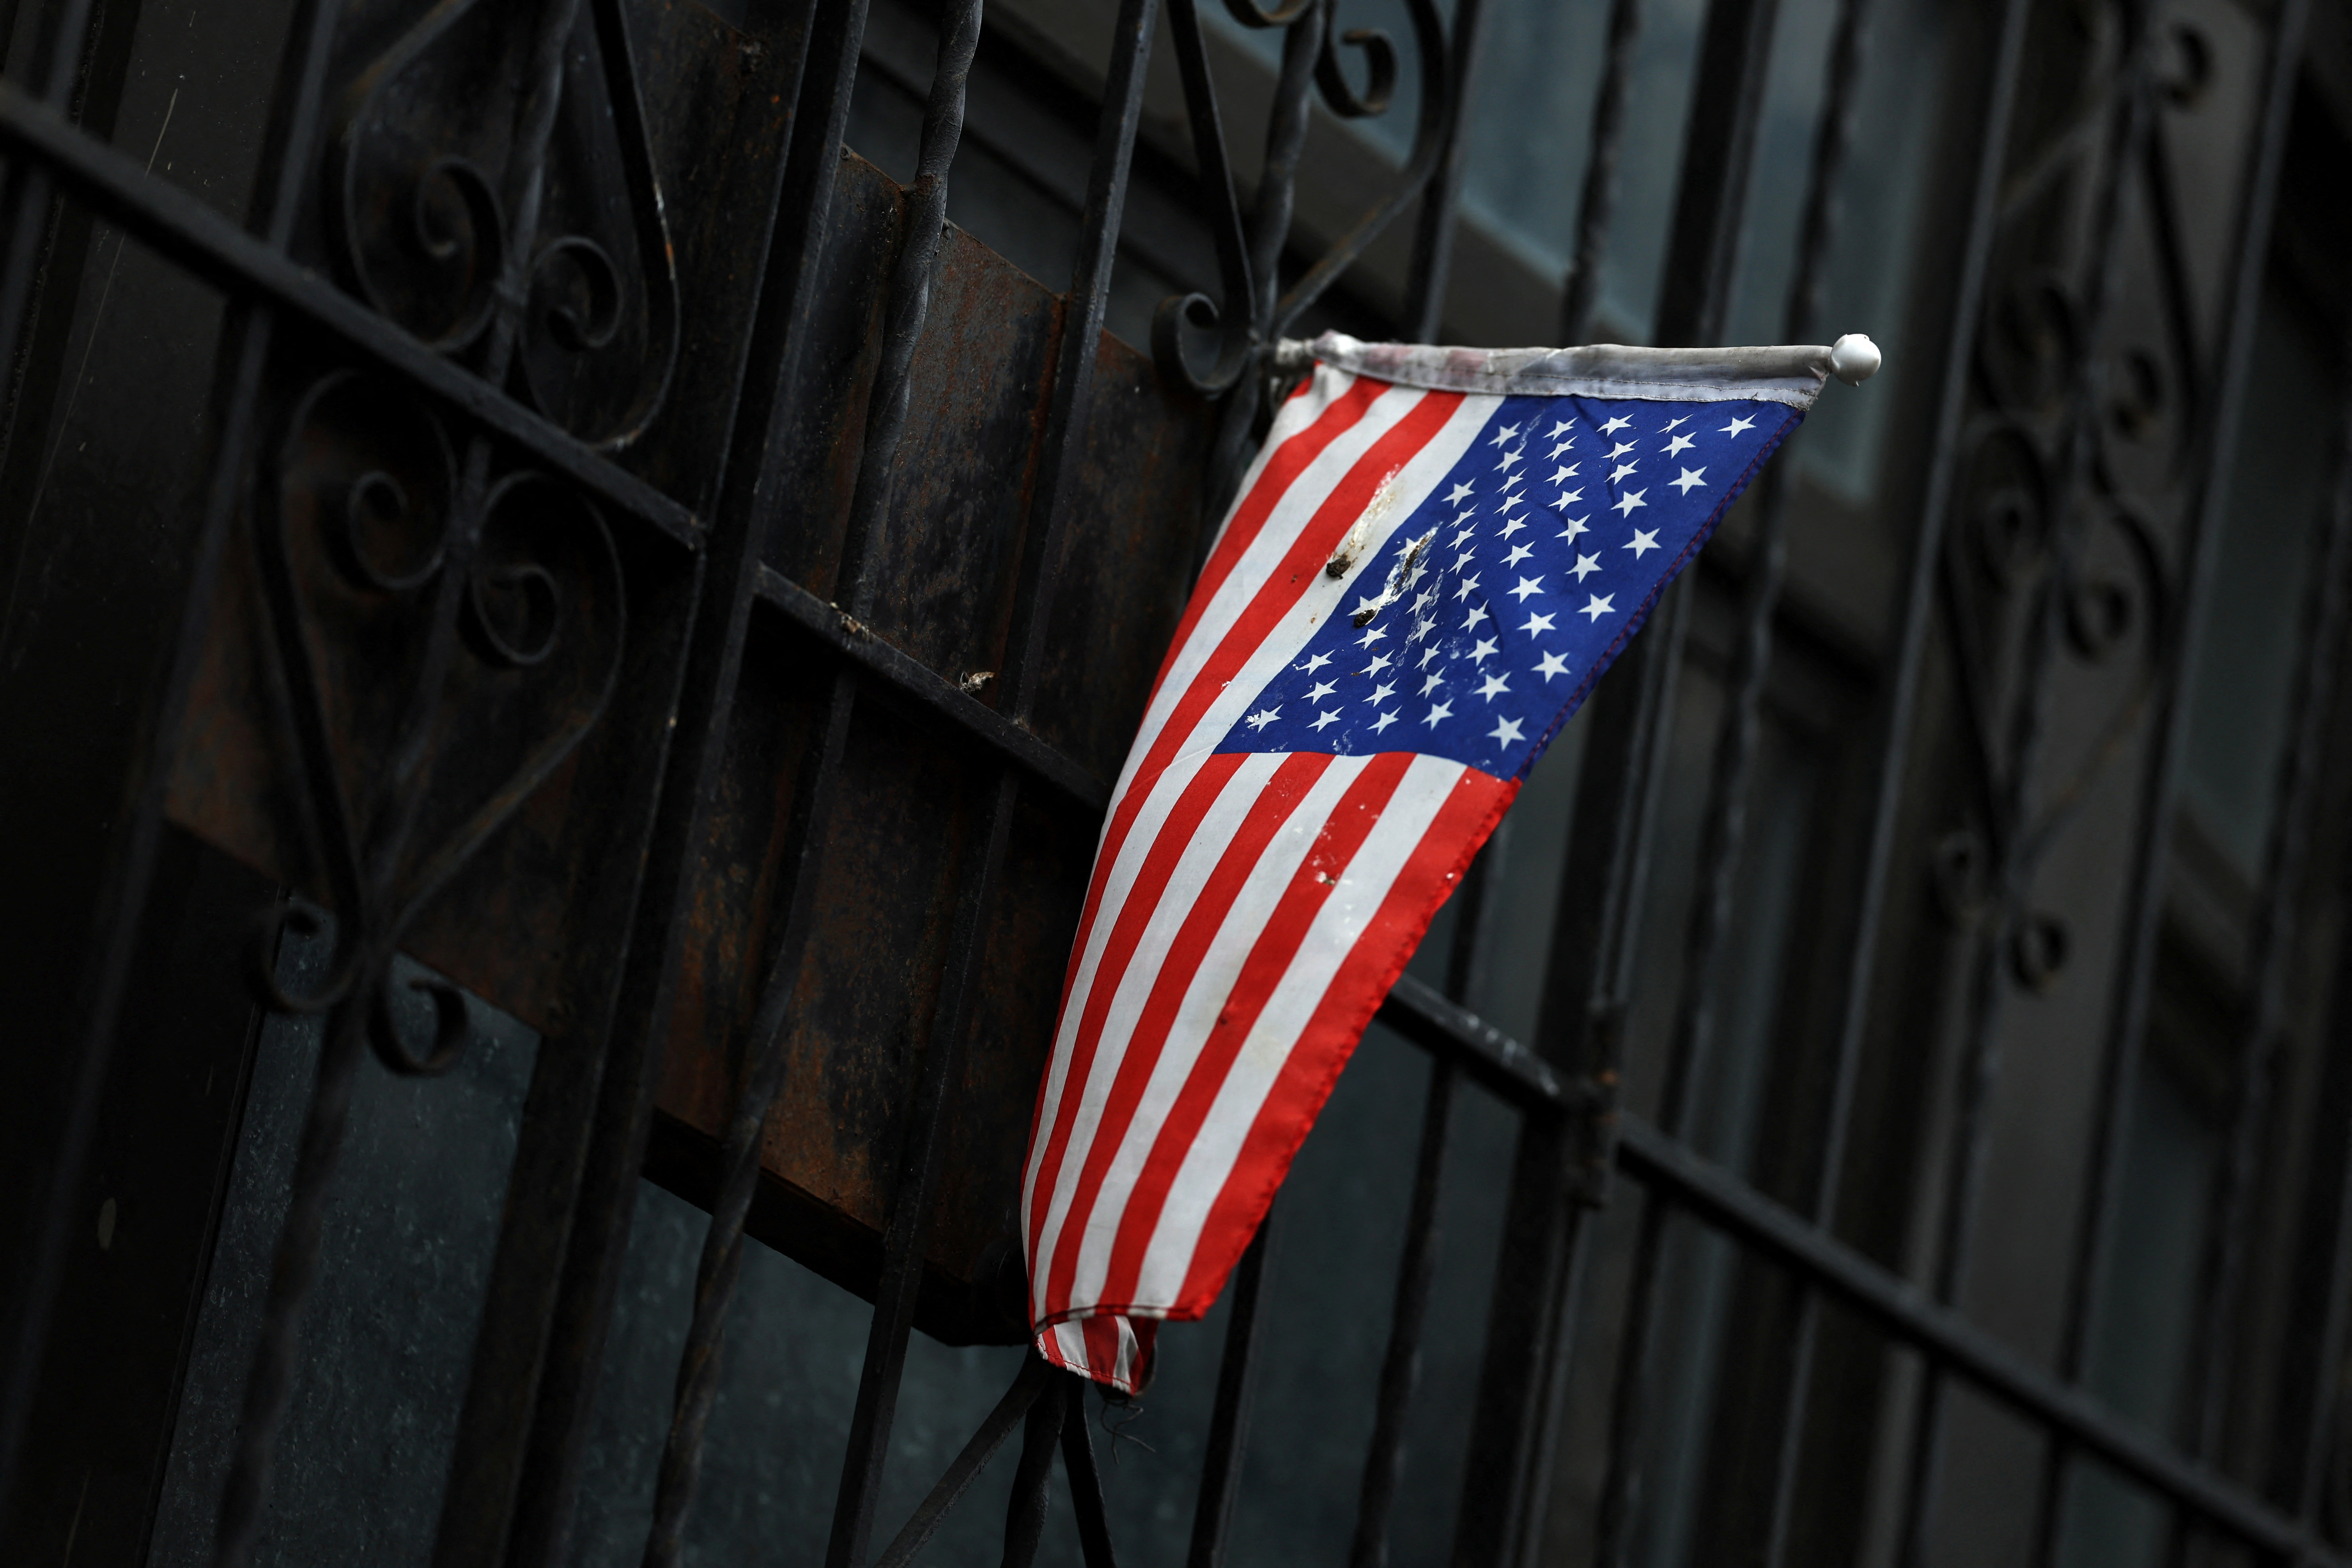 A U.S. flag hangs out the gated entrance to an apartment in the Washington Heights neighborhood of the borough of Manhattan in New York City